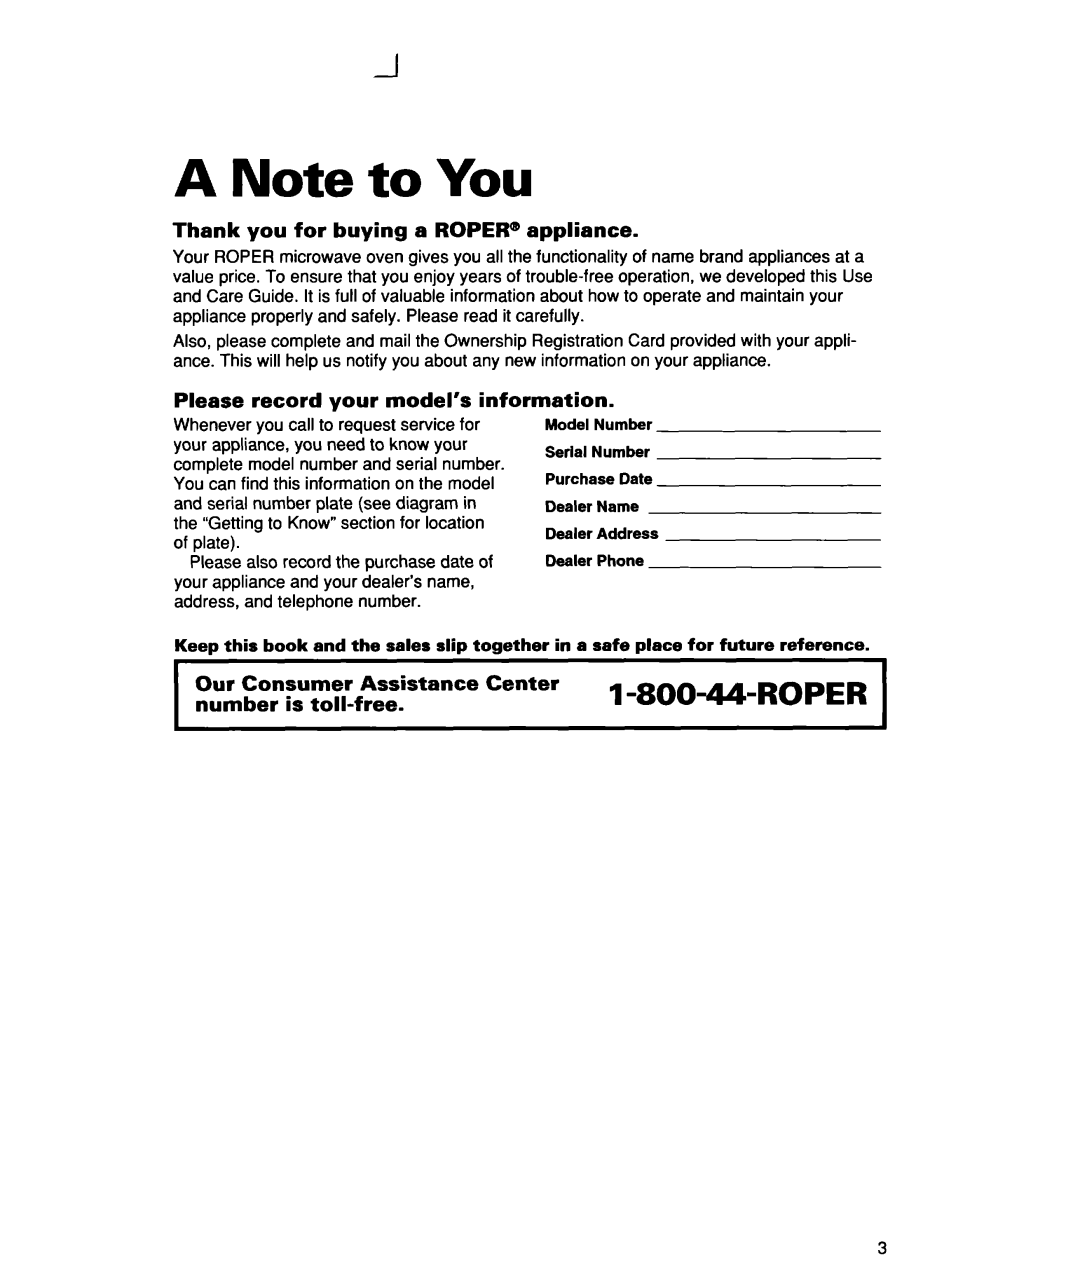 Whirlpool lREB/Q warranty A Note to You, I-80044-ROPER, Thank you for buying a ROPER@ appliance 